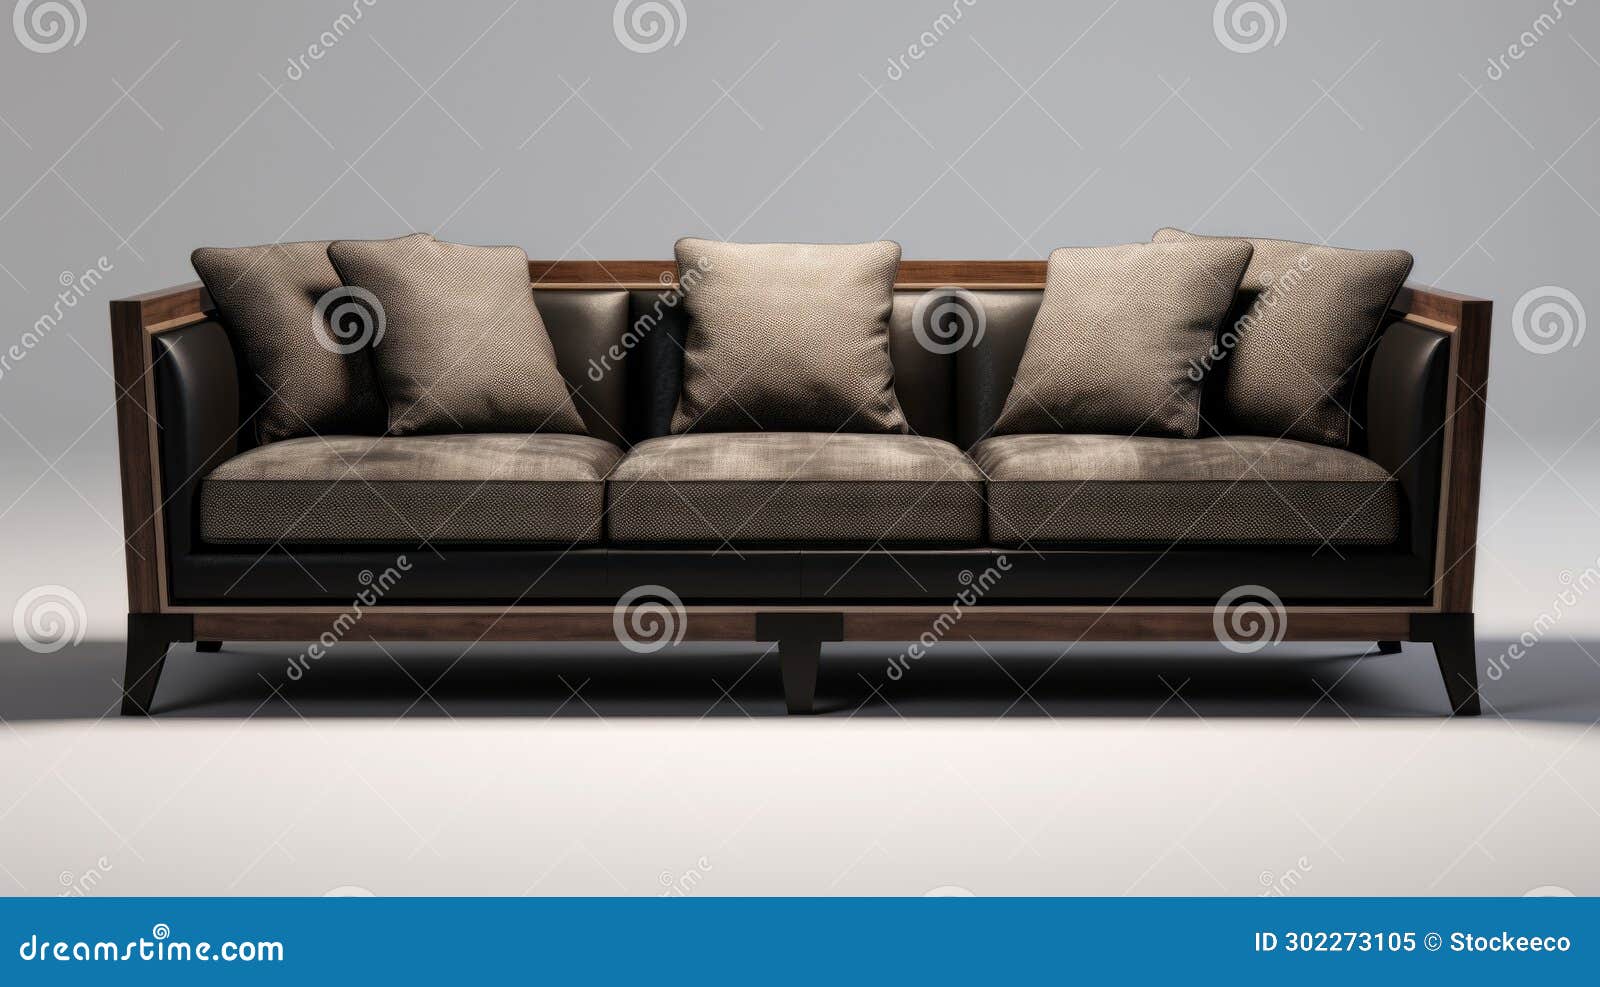 modern and wood sofa in detailed hyperrealism style